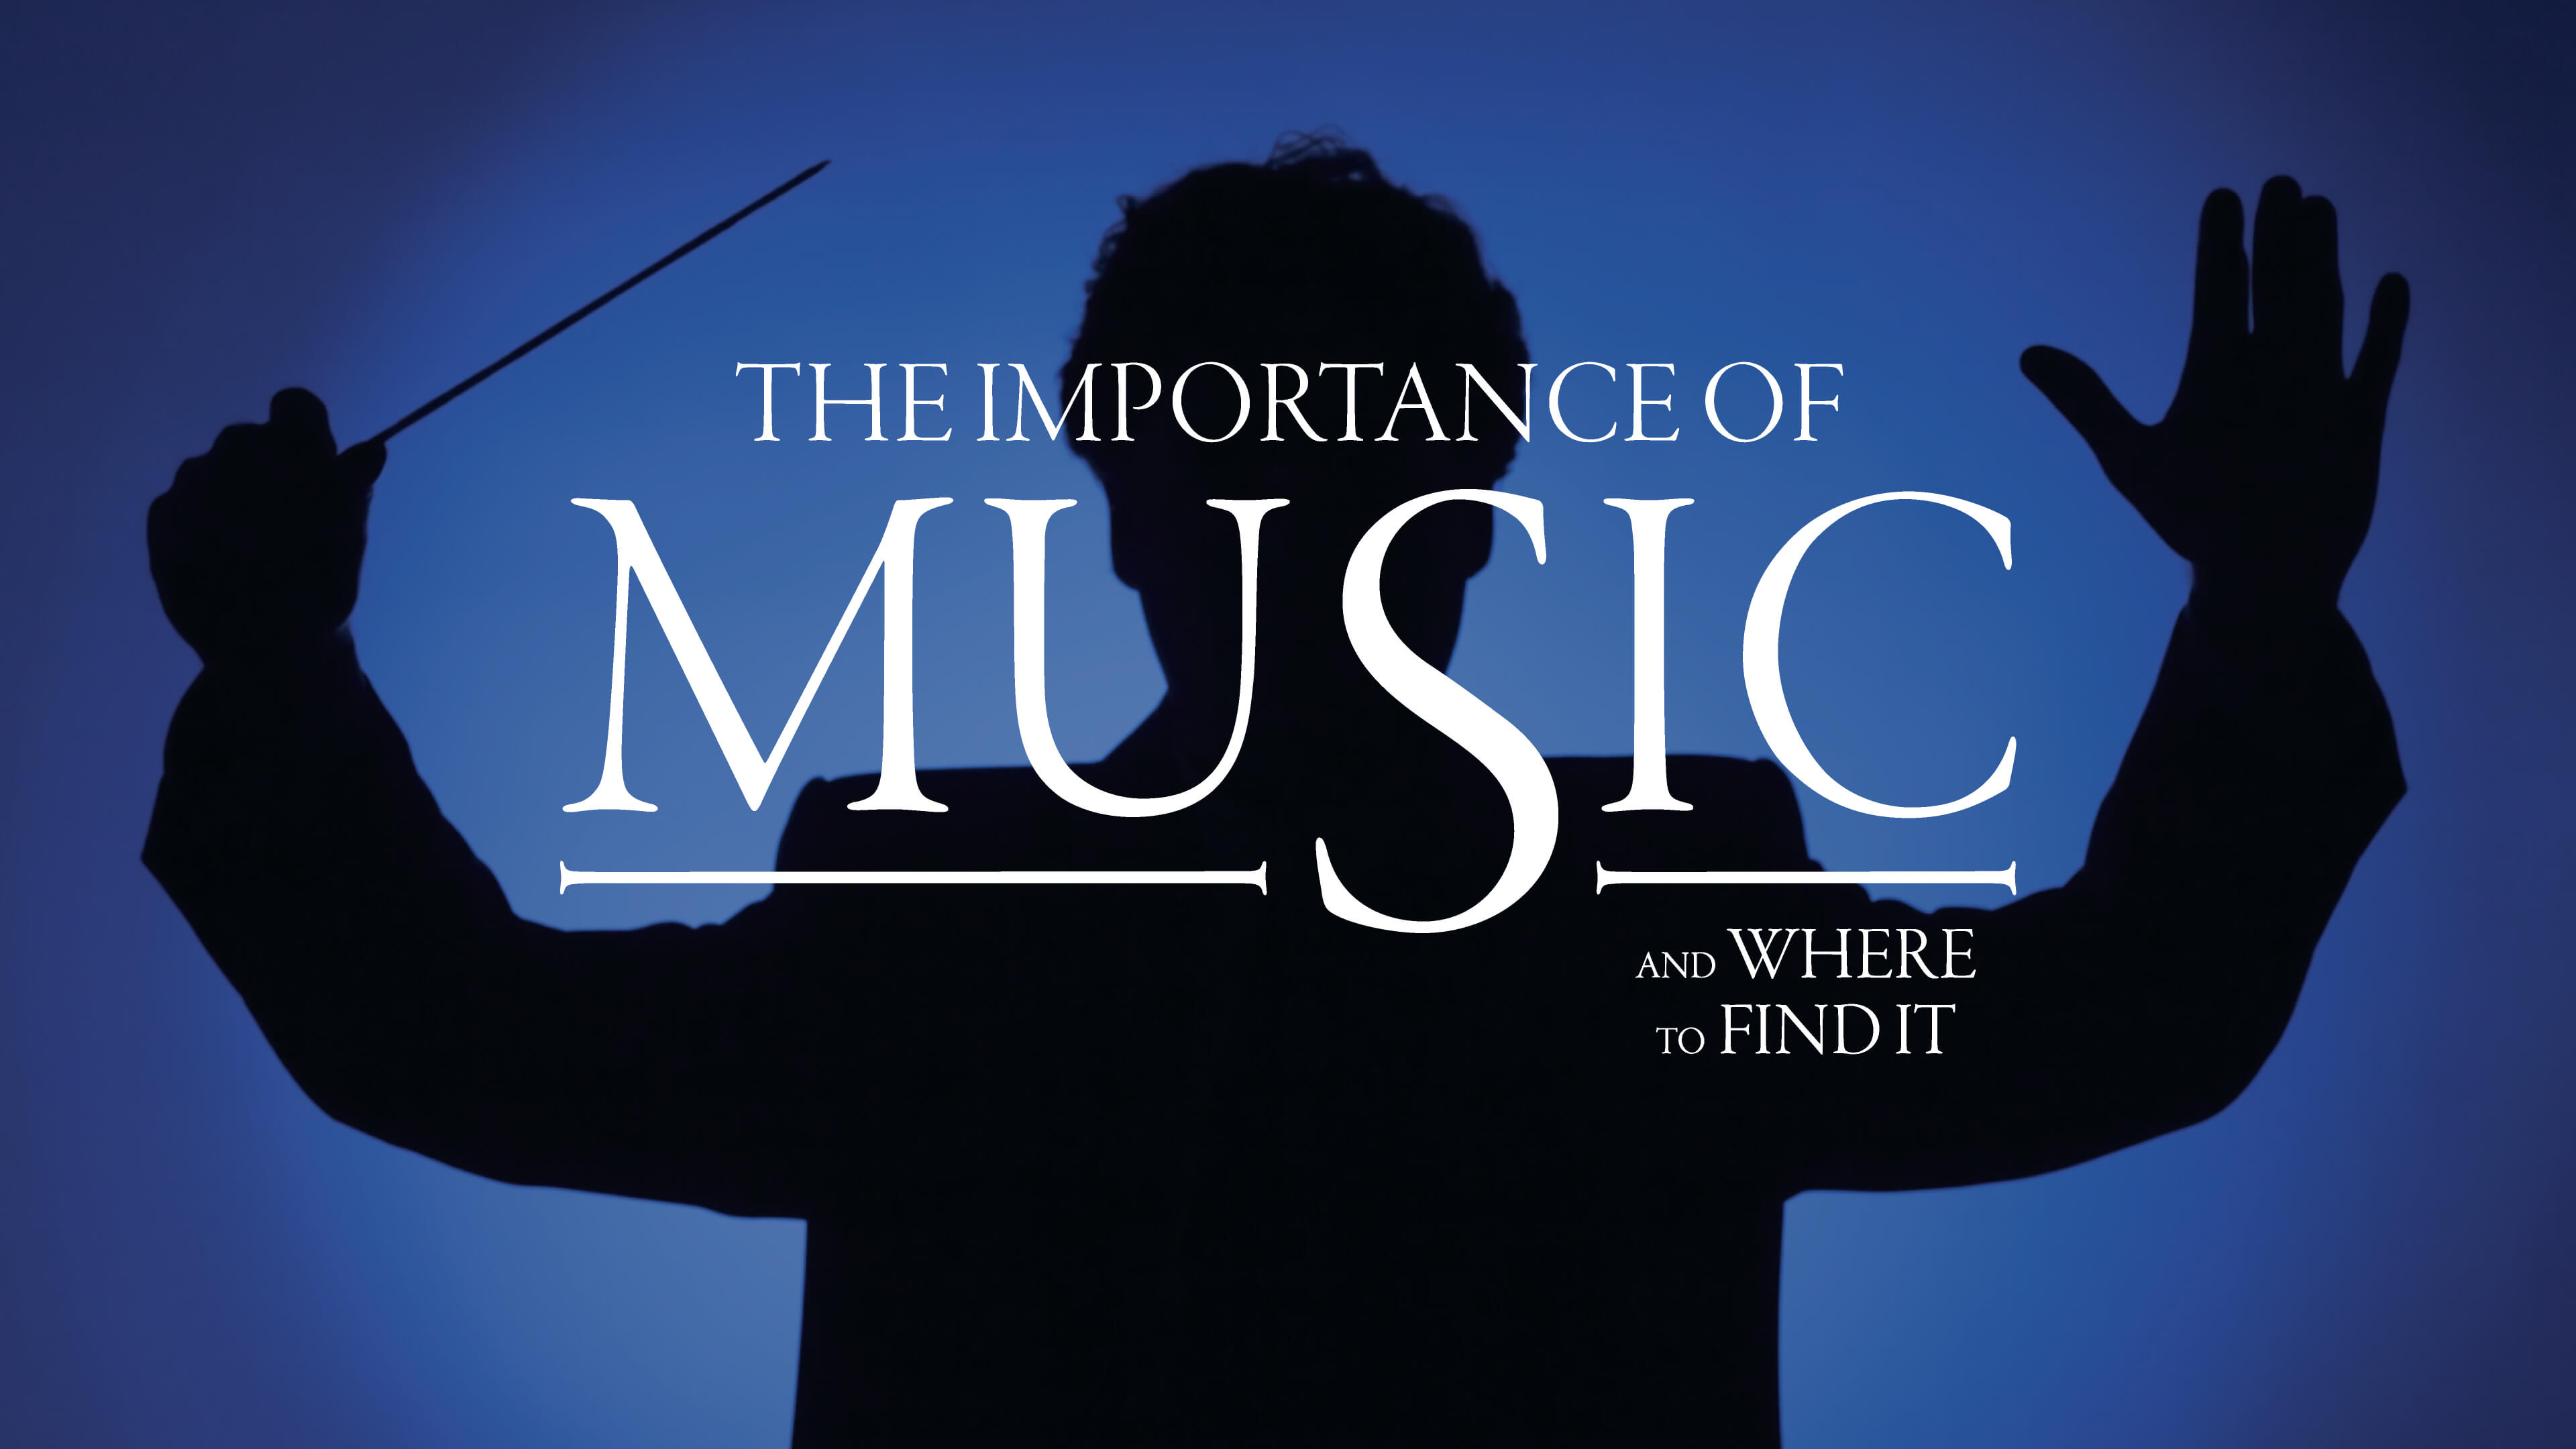 The importance of music